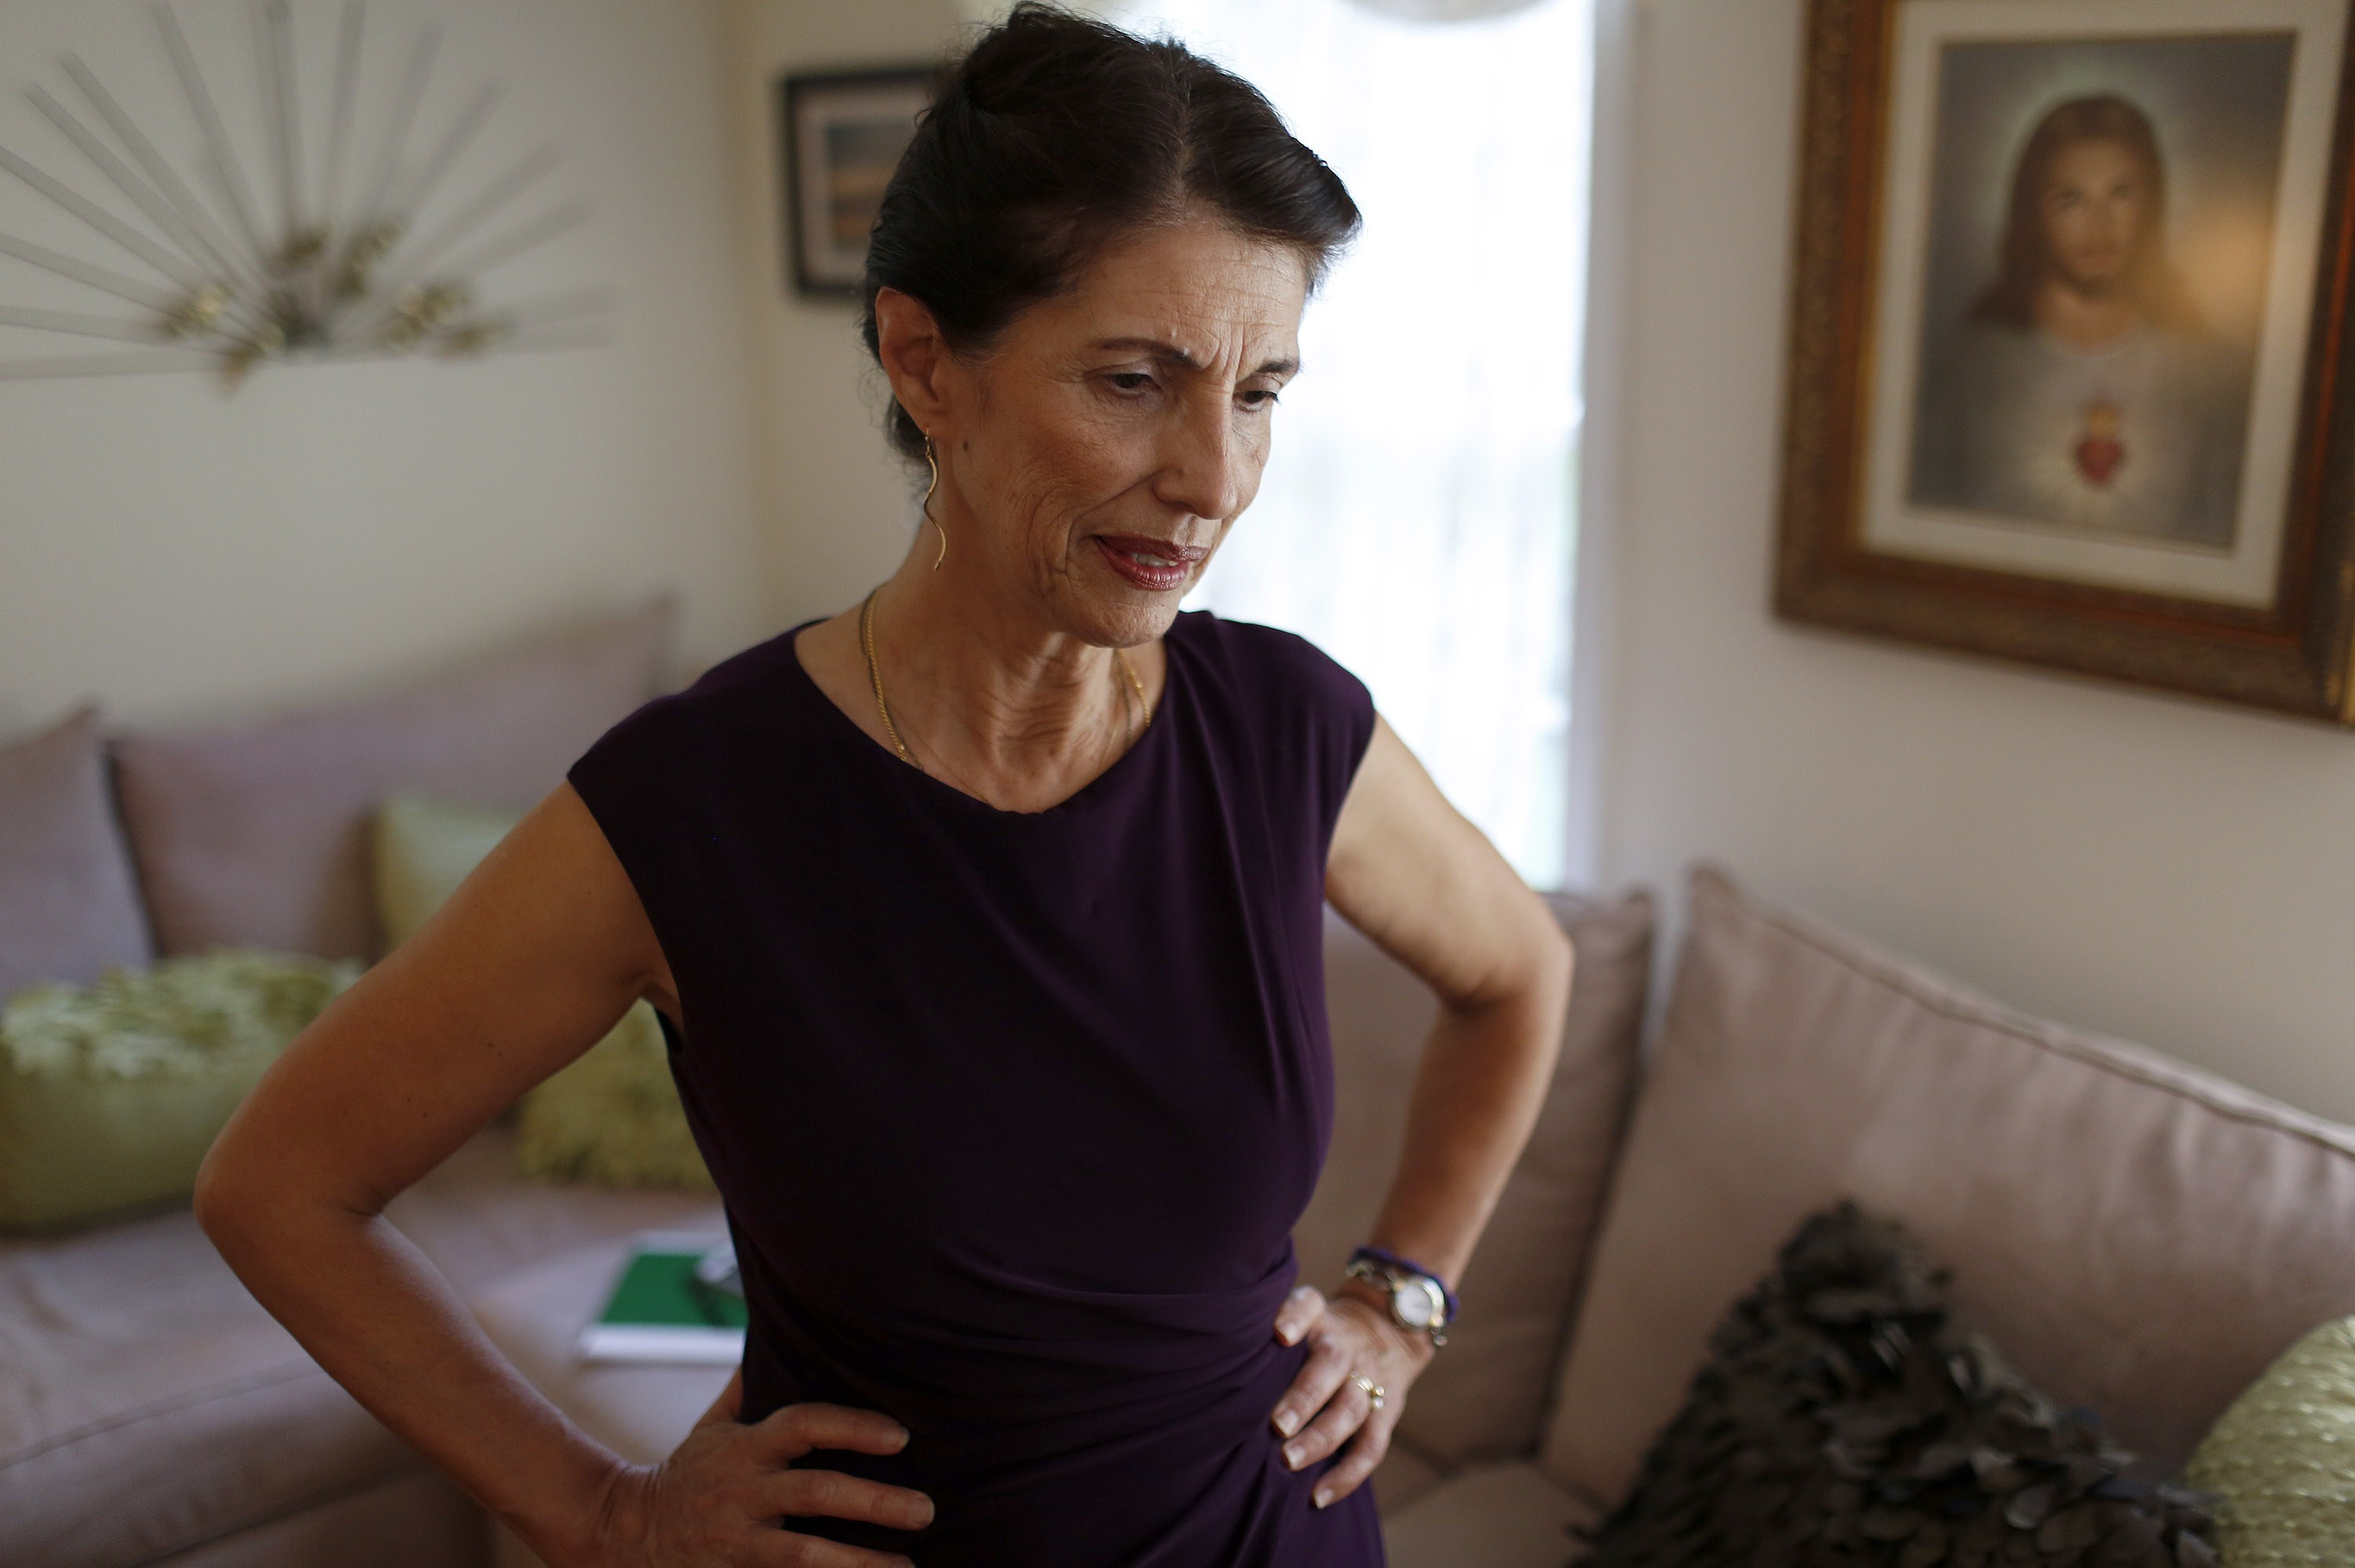 Diane Foley, mother of James Foley, pauses for a moment during an interview at her home August 24, 2014, in Rochester, New Hampshire. (Dominick Reuter&mdash;AFP/Getty Images)